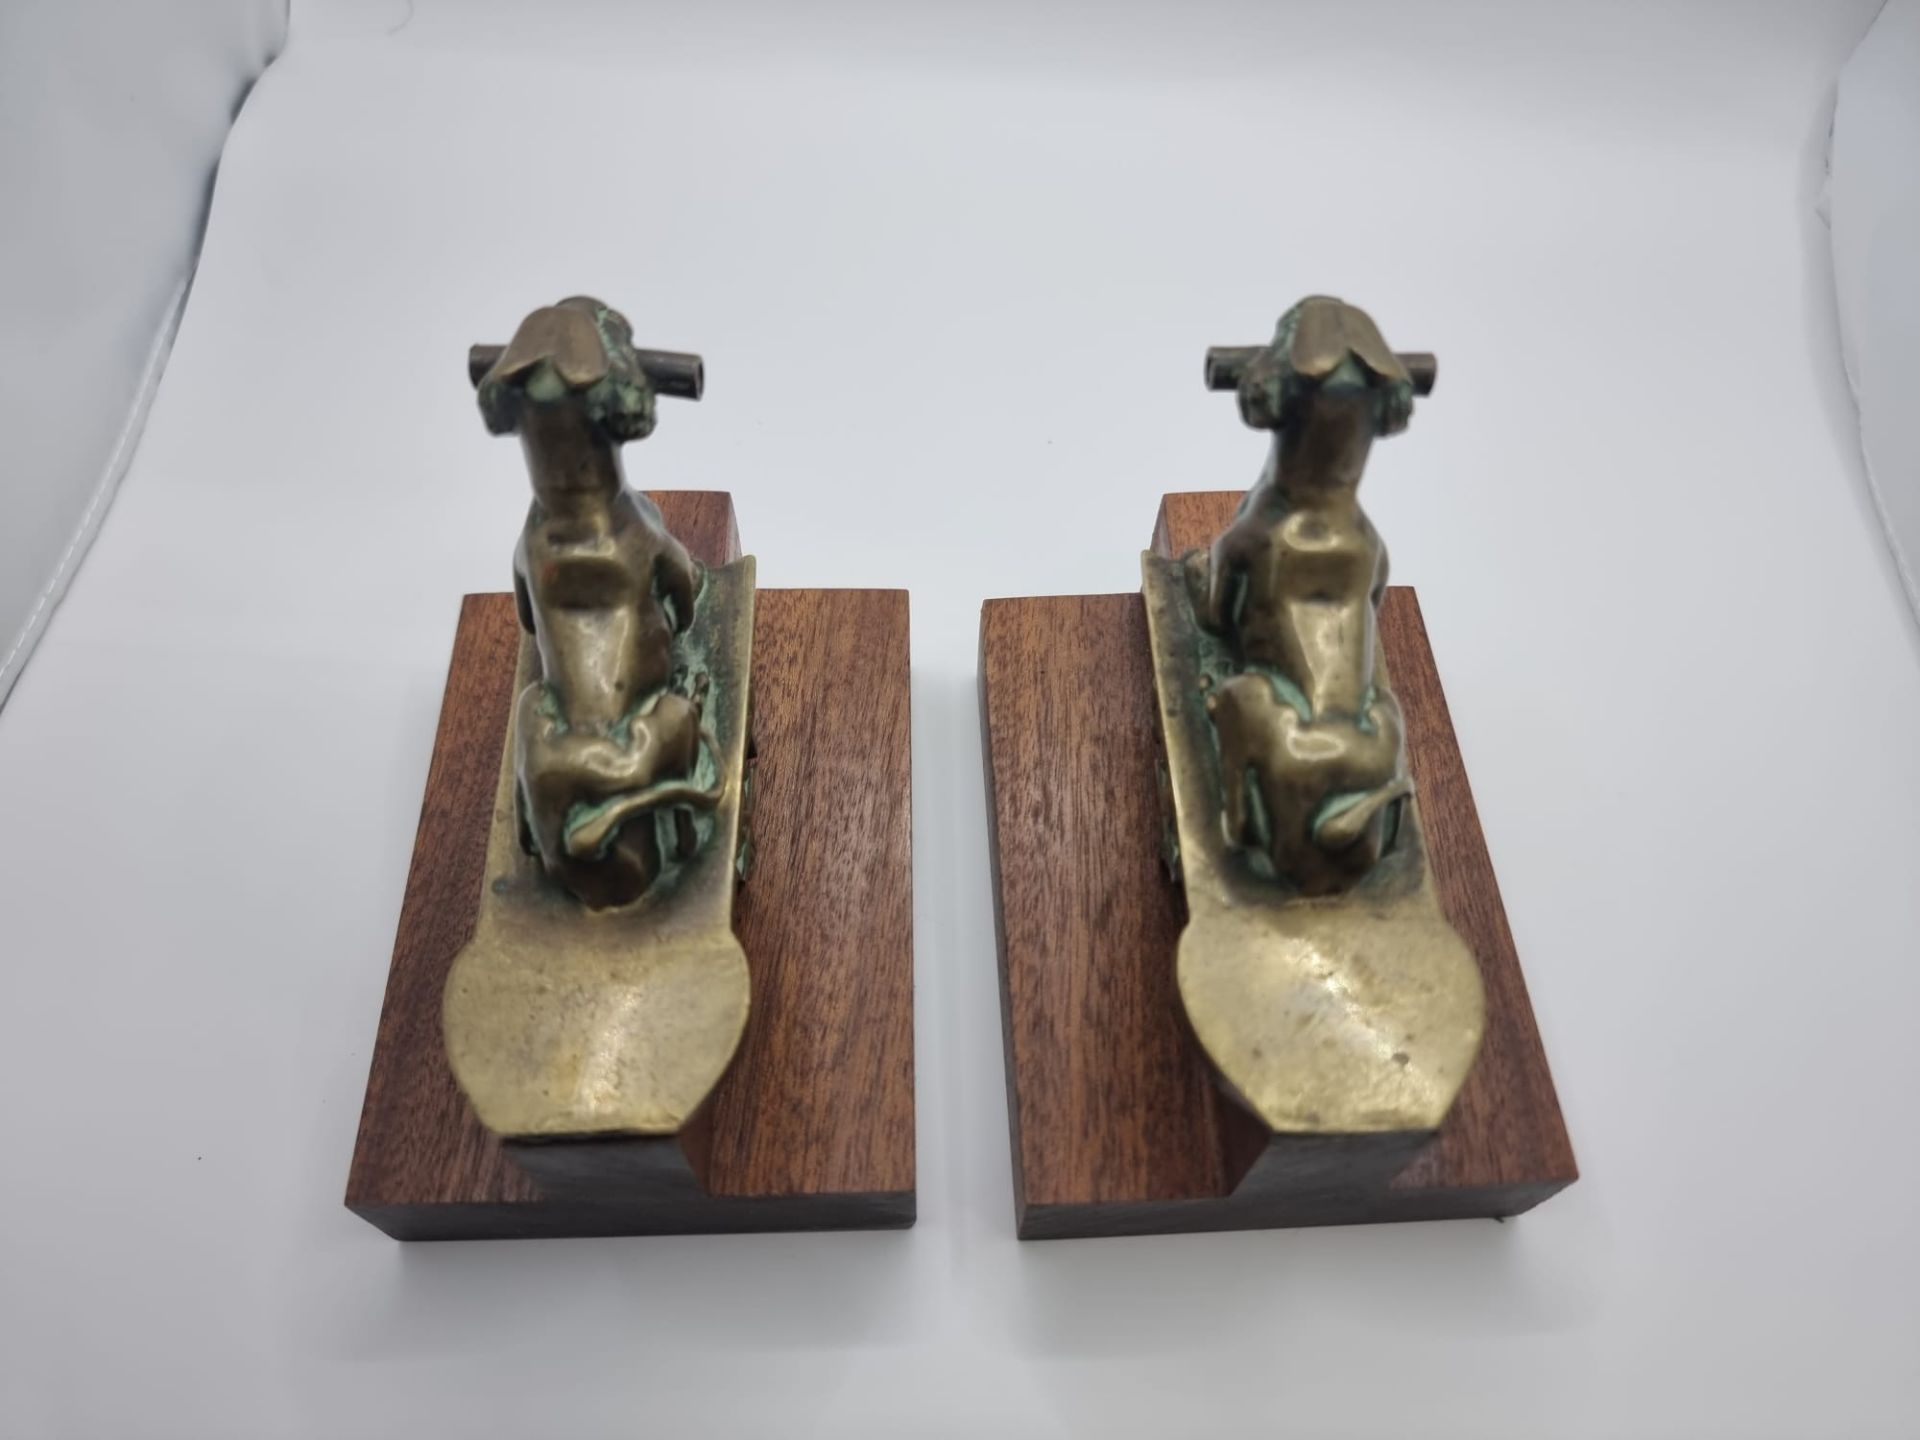 Pair Of 19th Century Decorative Bronze Lions later added to wooden plinth thus converted as Bookends - Image 9 of 10